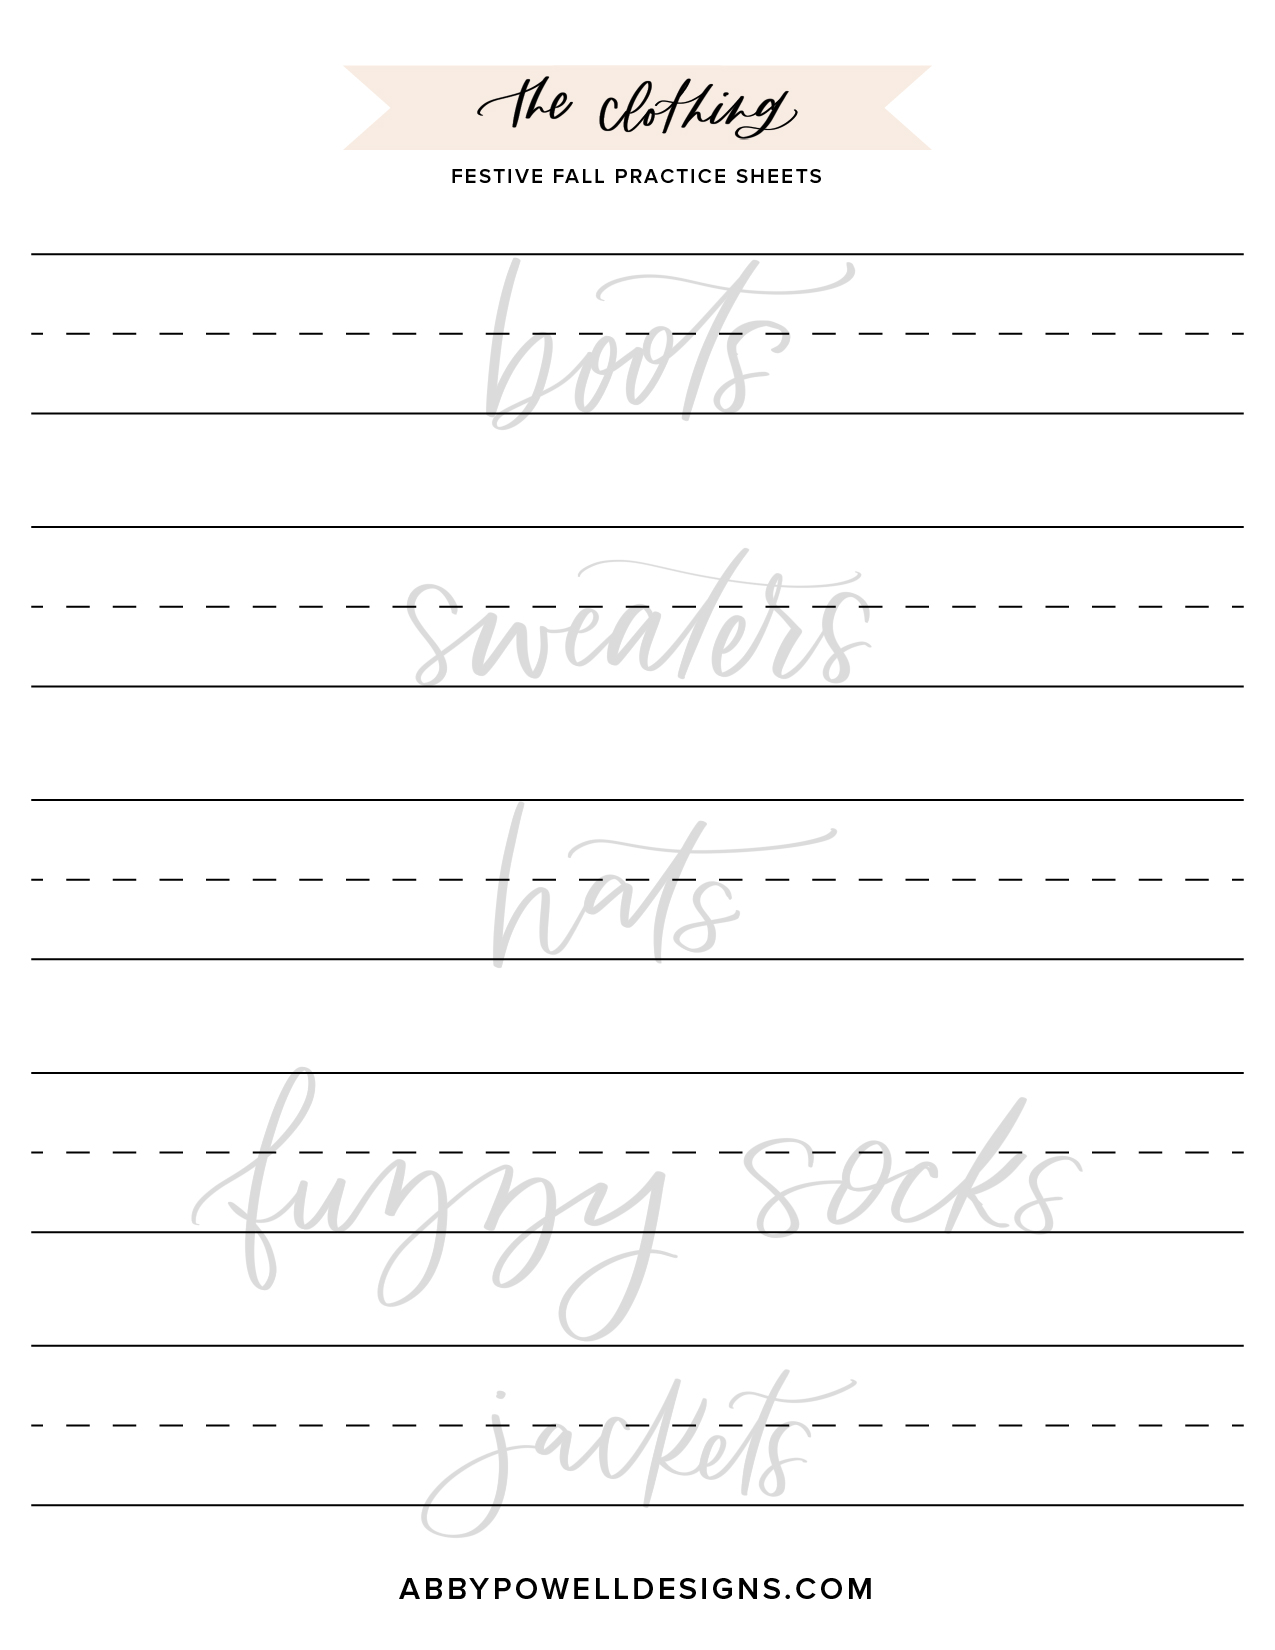 Practice lettering fall inspired words with Abby Powell's fall lettering practice sheets that you can print and use from home.